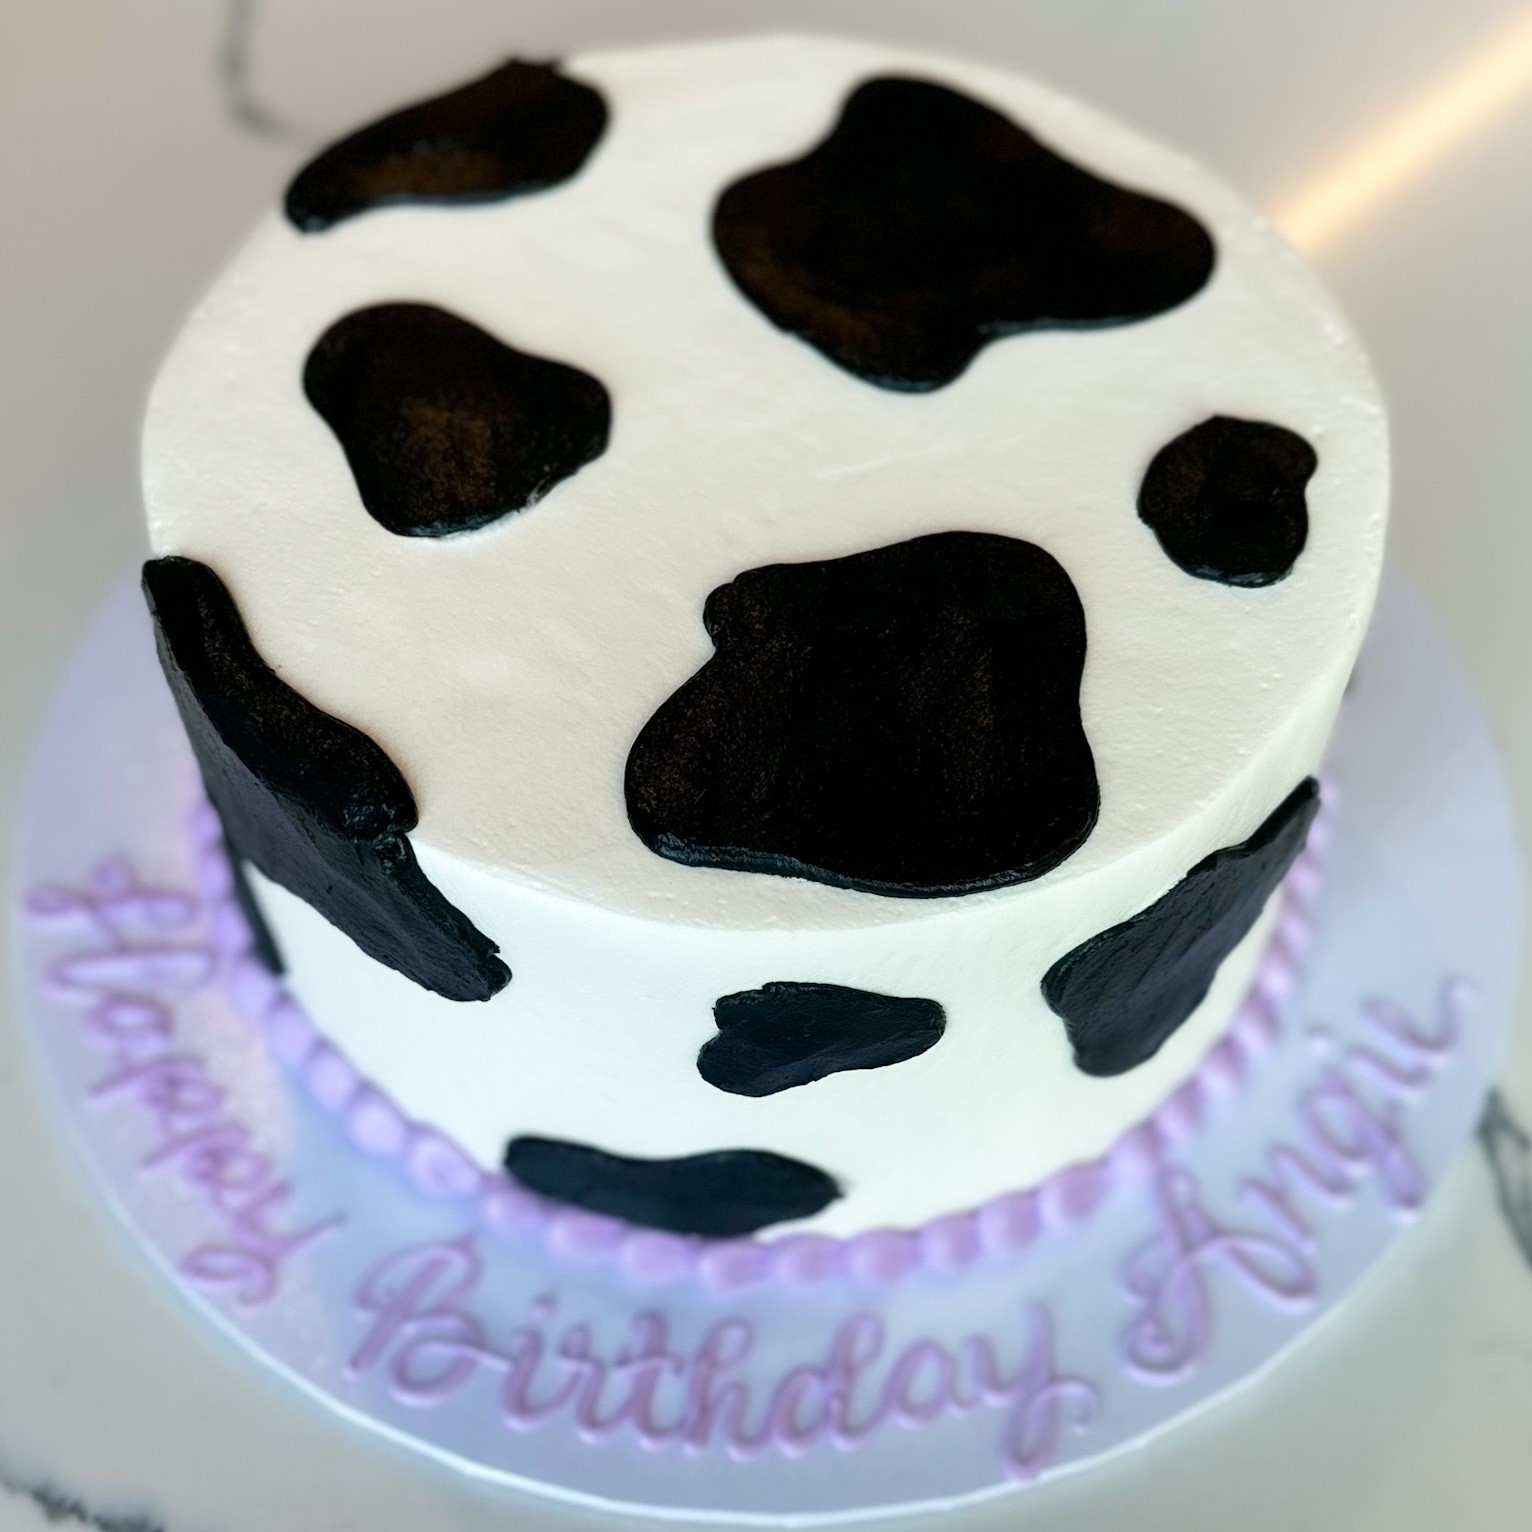 COW PRINT A cute pink and cow print cake for Kirsty to celebrate her ... |  TikTok